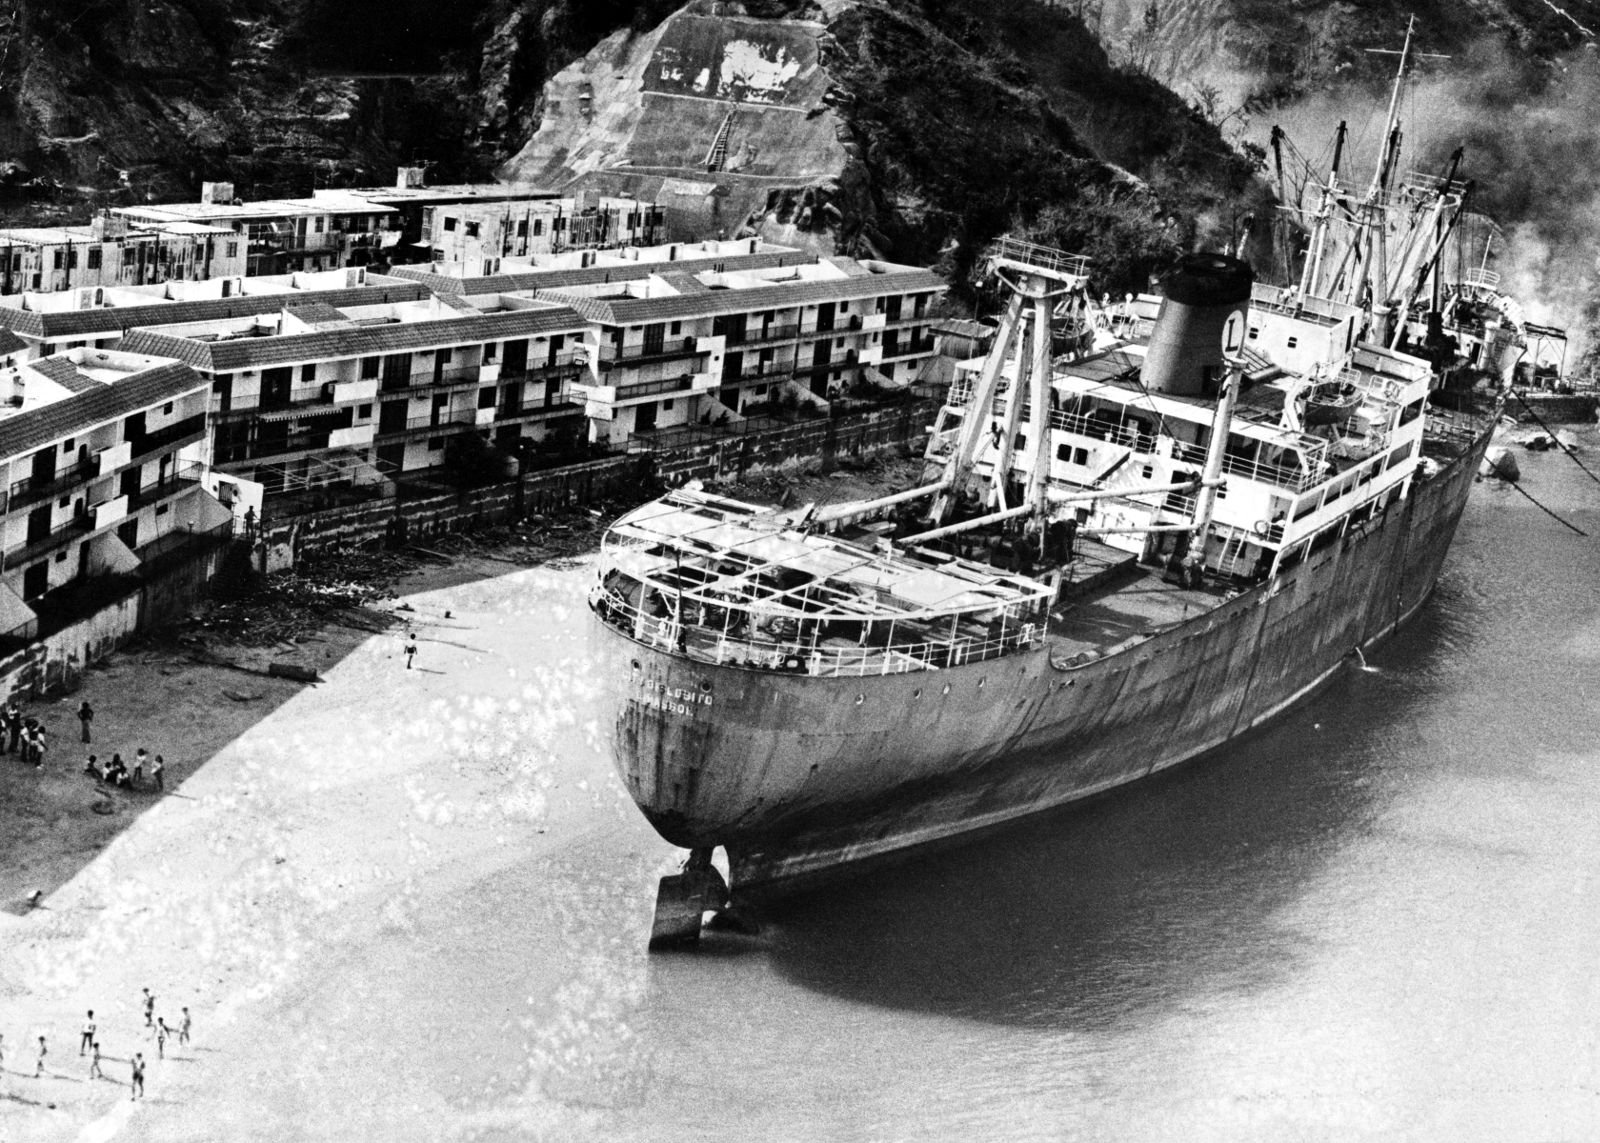 The freight carrier ‘City of Lobito’ rests on Cheung Chau’s Tung Wan beach after being blown ashore